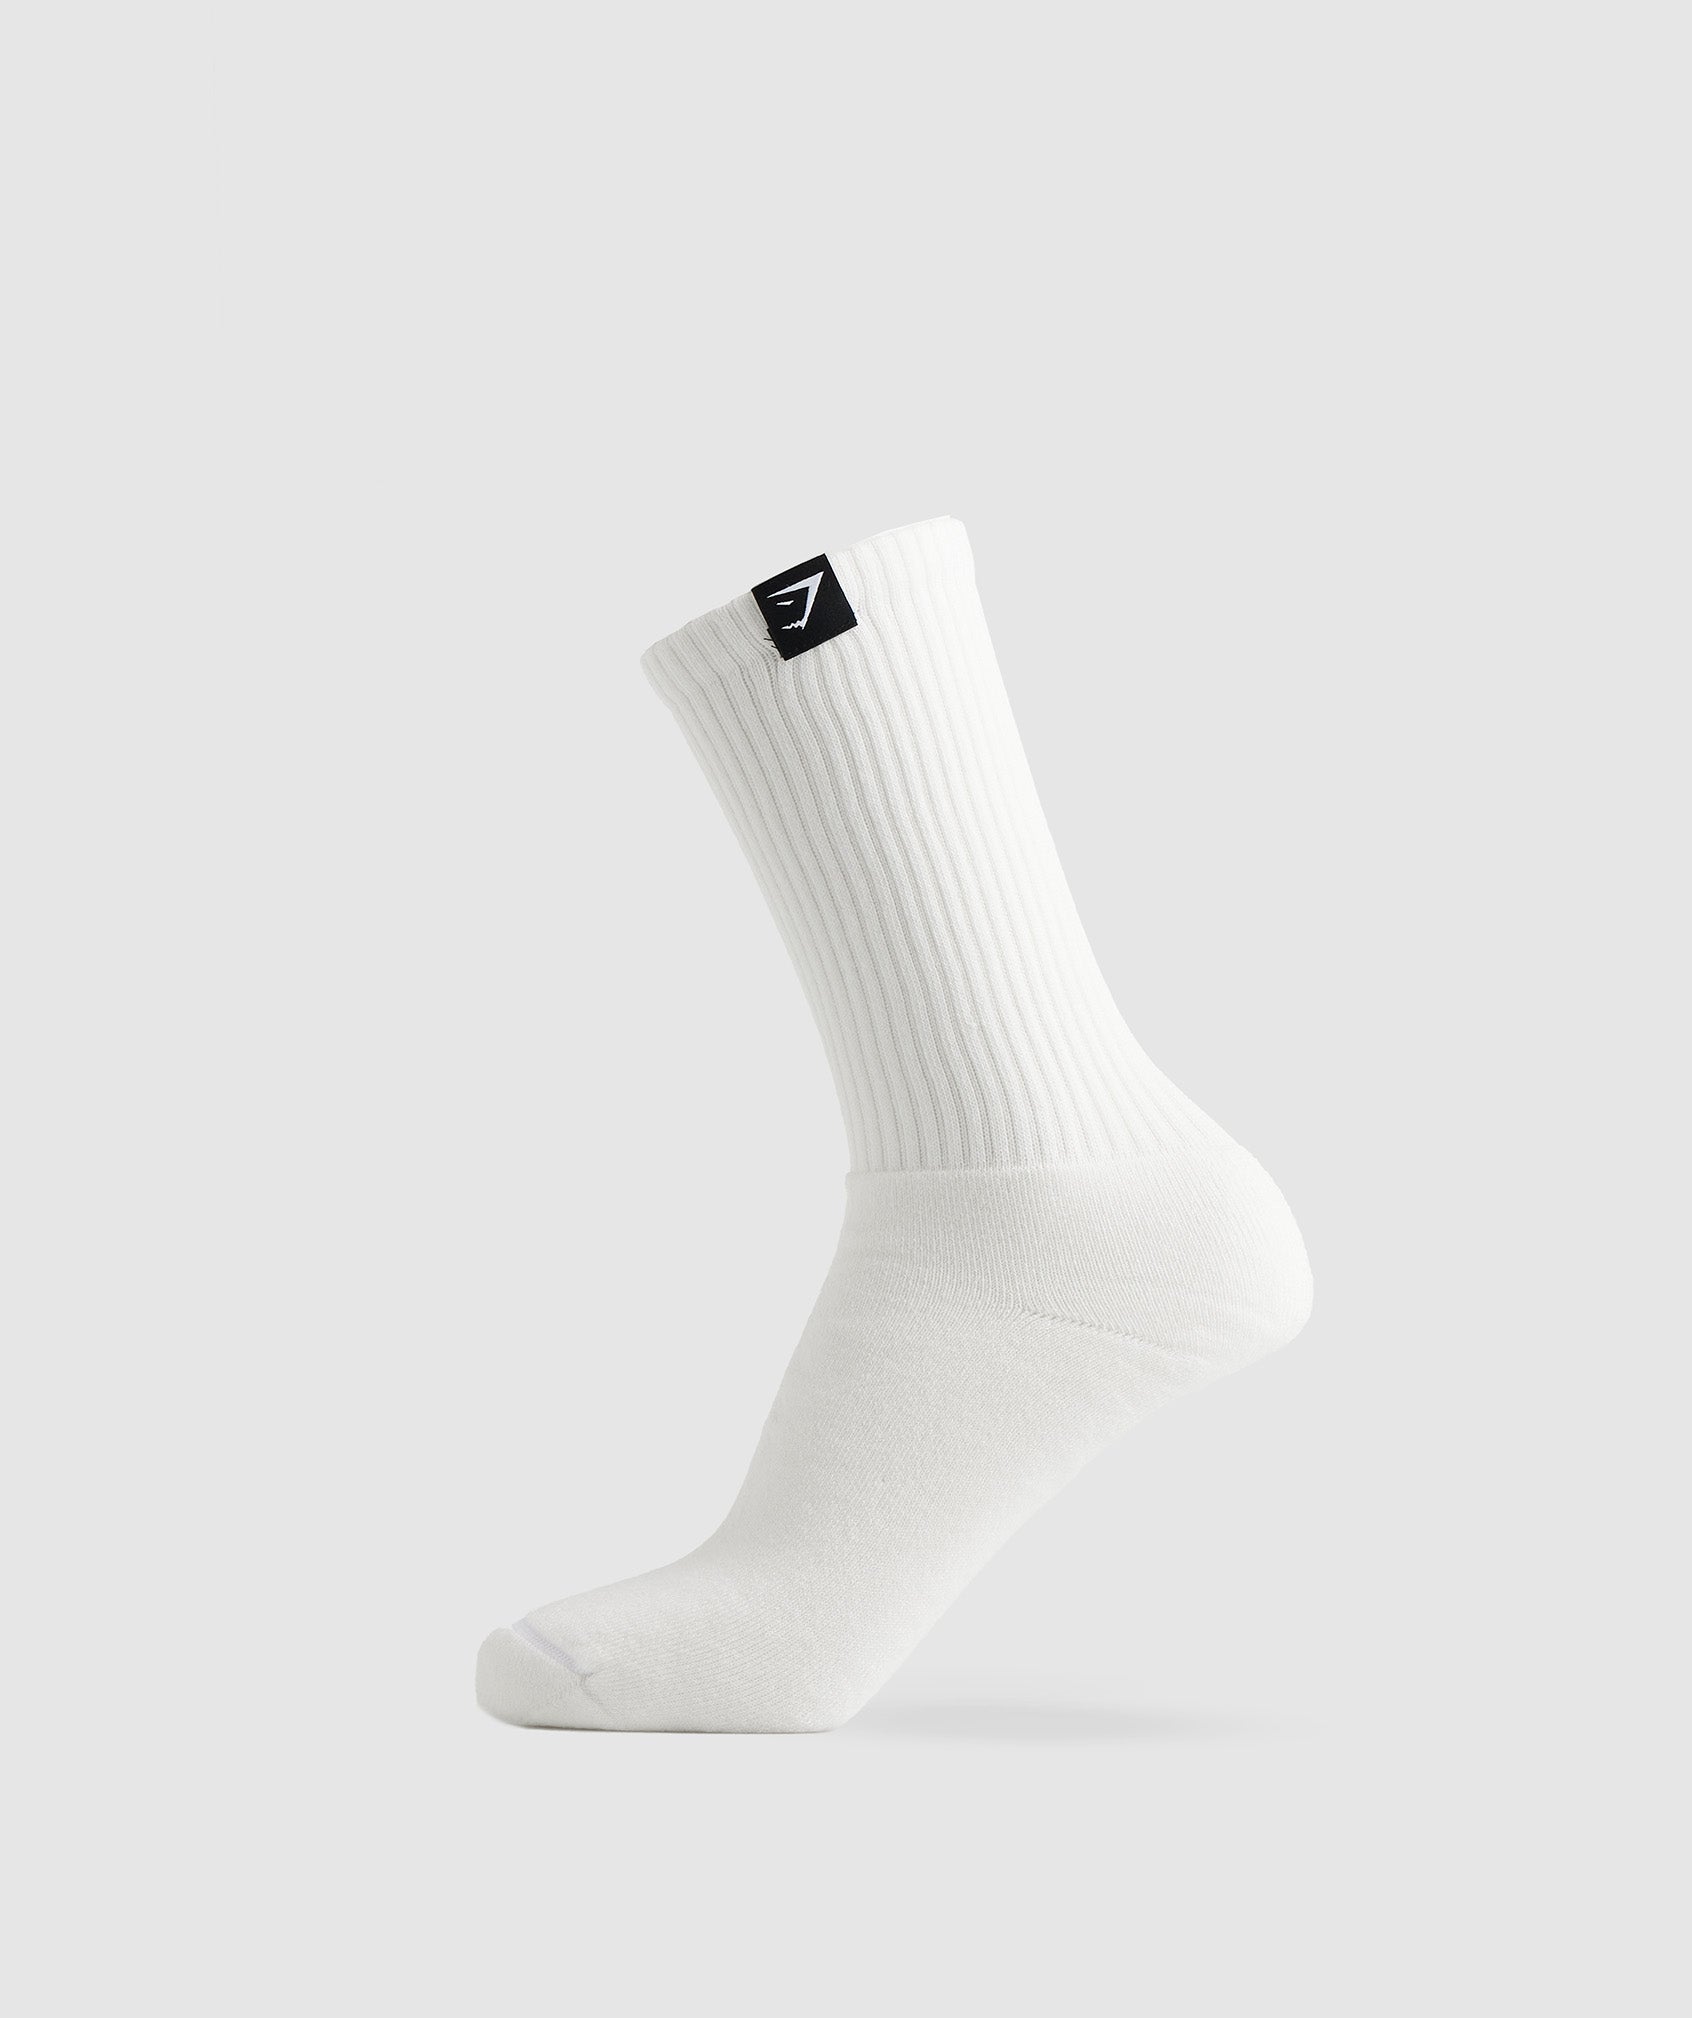 Premium Combed Cotton Socks 1pk in {{variantColor} is out of stock